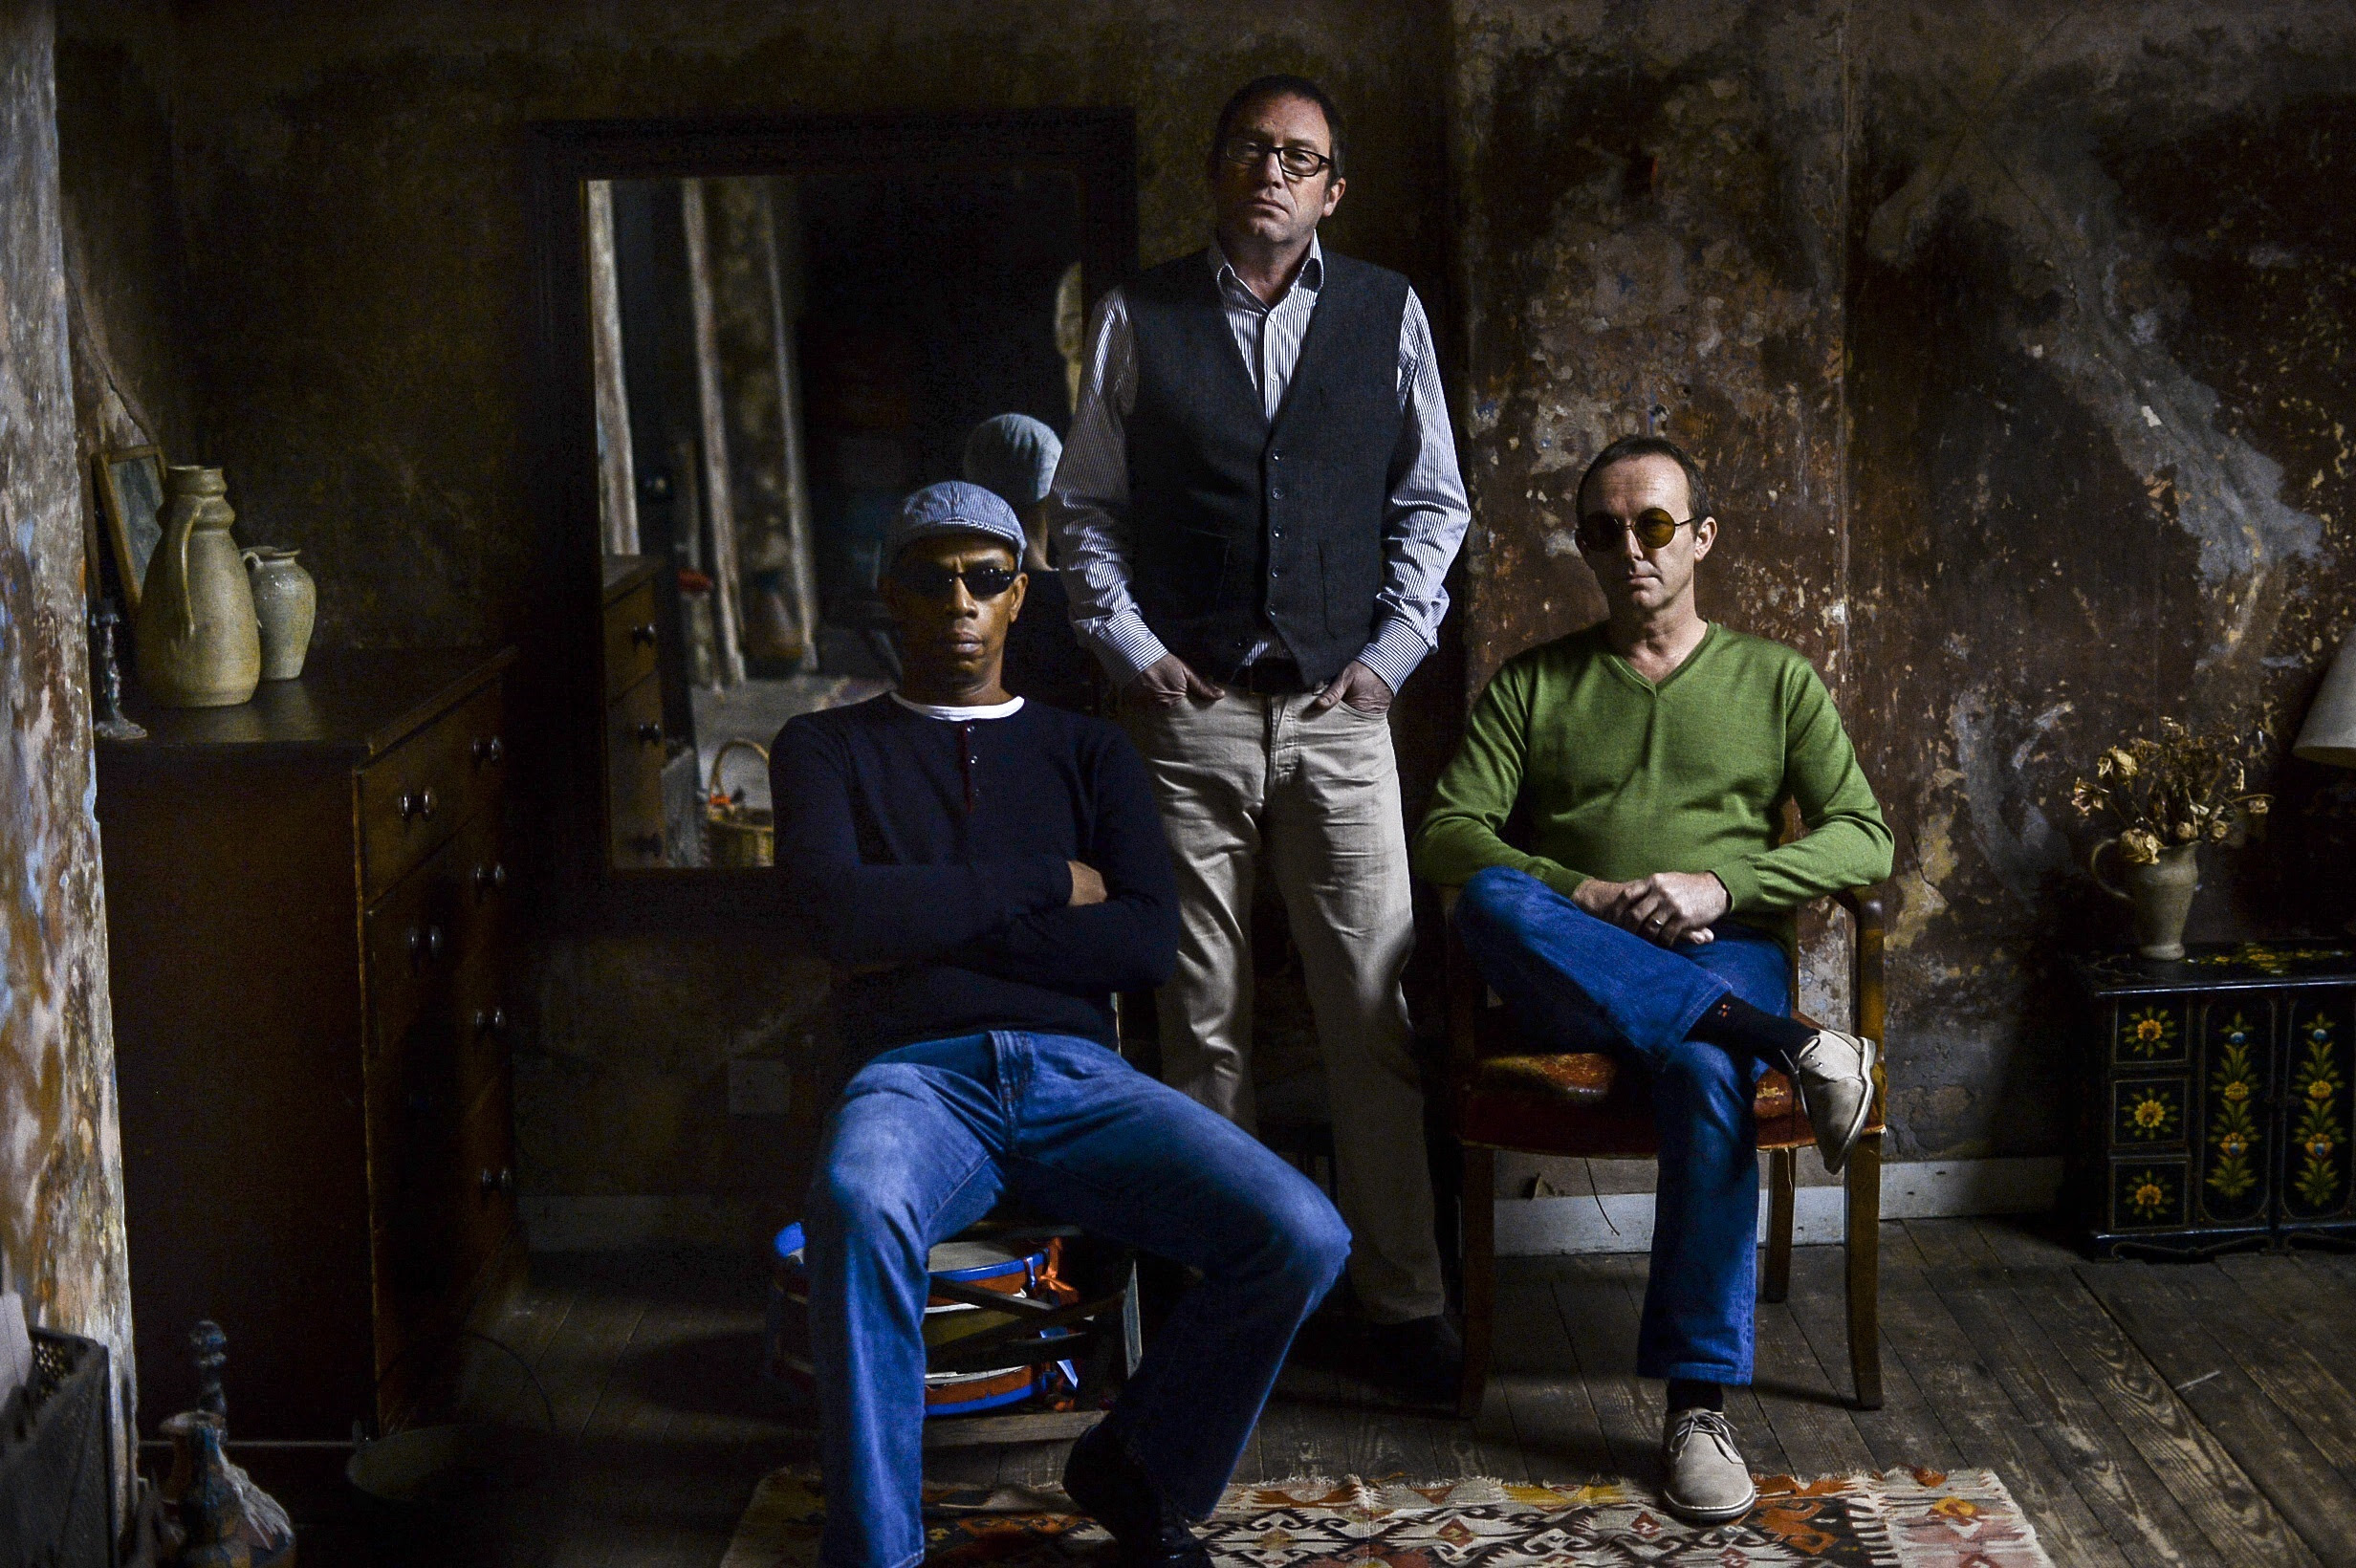 Ocean Colour Scene - Celebrate 20 years of 'The Mosely Shoals' live @ Olympia, Liverpool